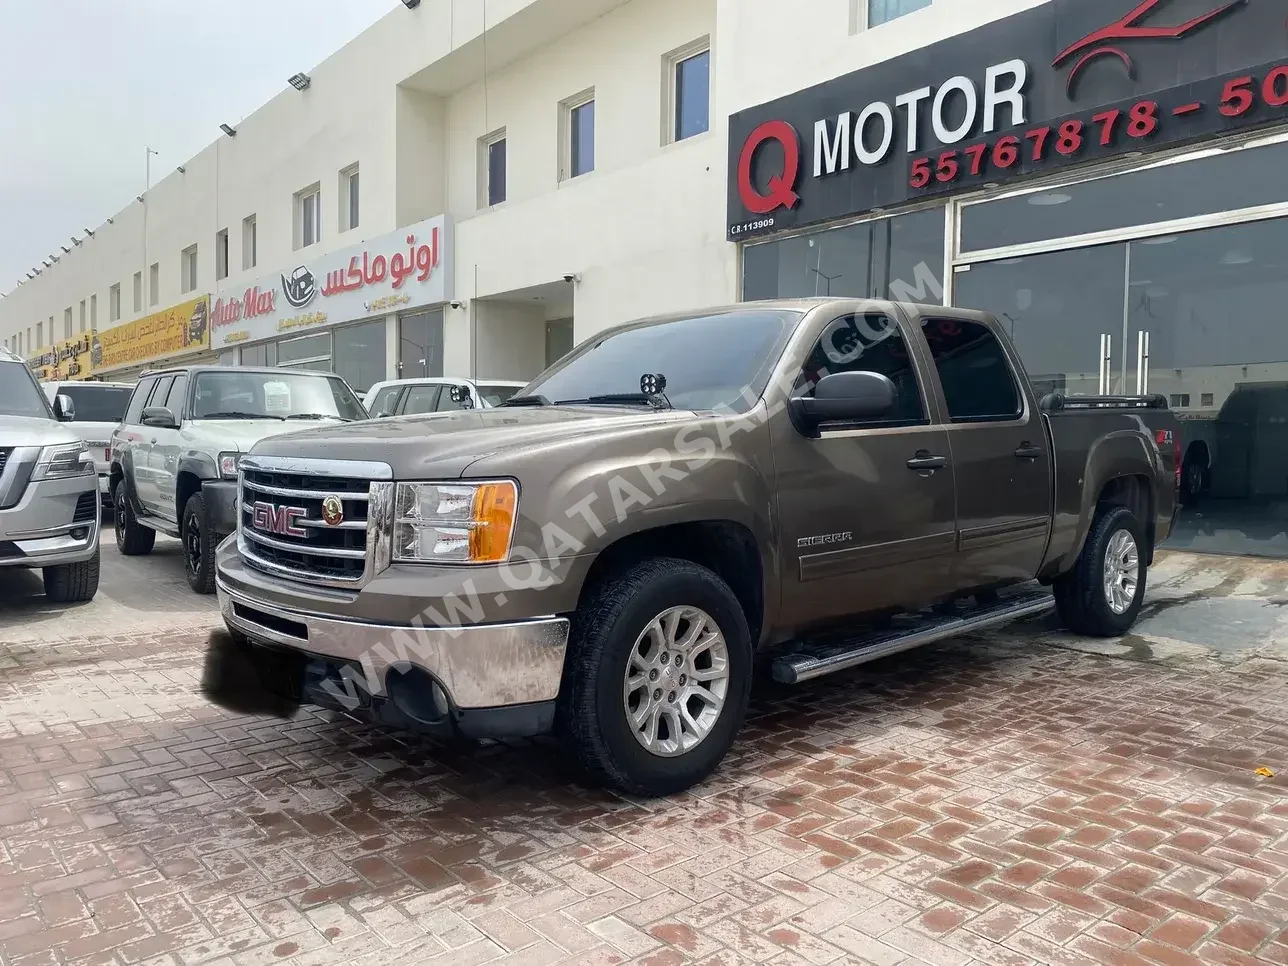 GMC  Sierra  1500  2012  Automatic  192,000 Km  8 Cylinder  Four Wheel Drive (4WD)  Pick Up  Brown